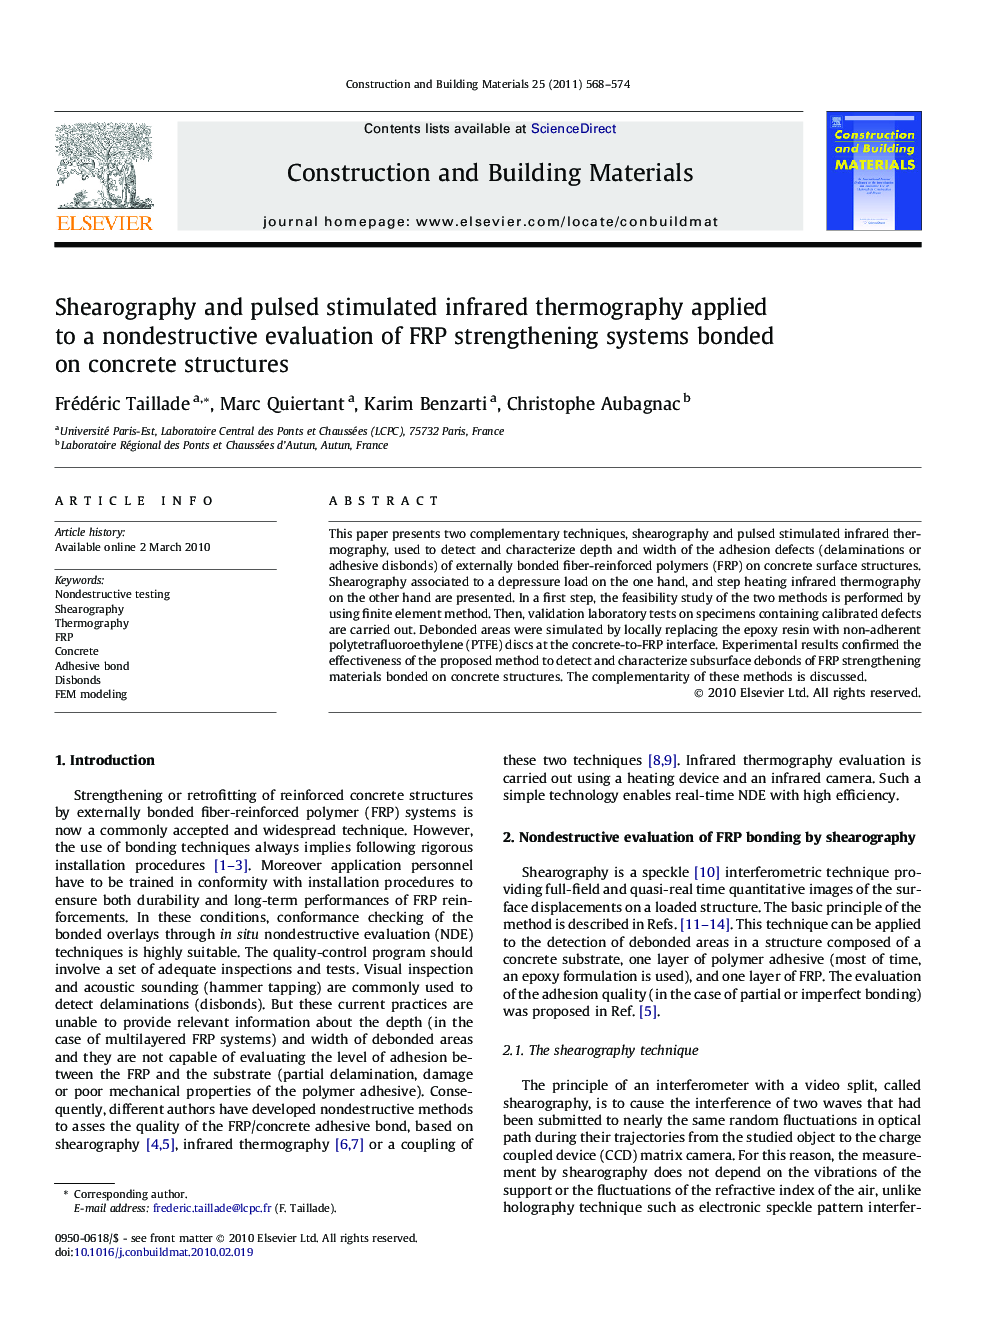 Shearography and pulsed stimulated infrared thermography applied to a nondestructive evaluation of FRP strengthening systems bonded on concrete structures